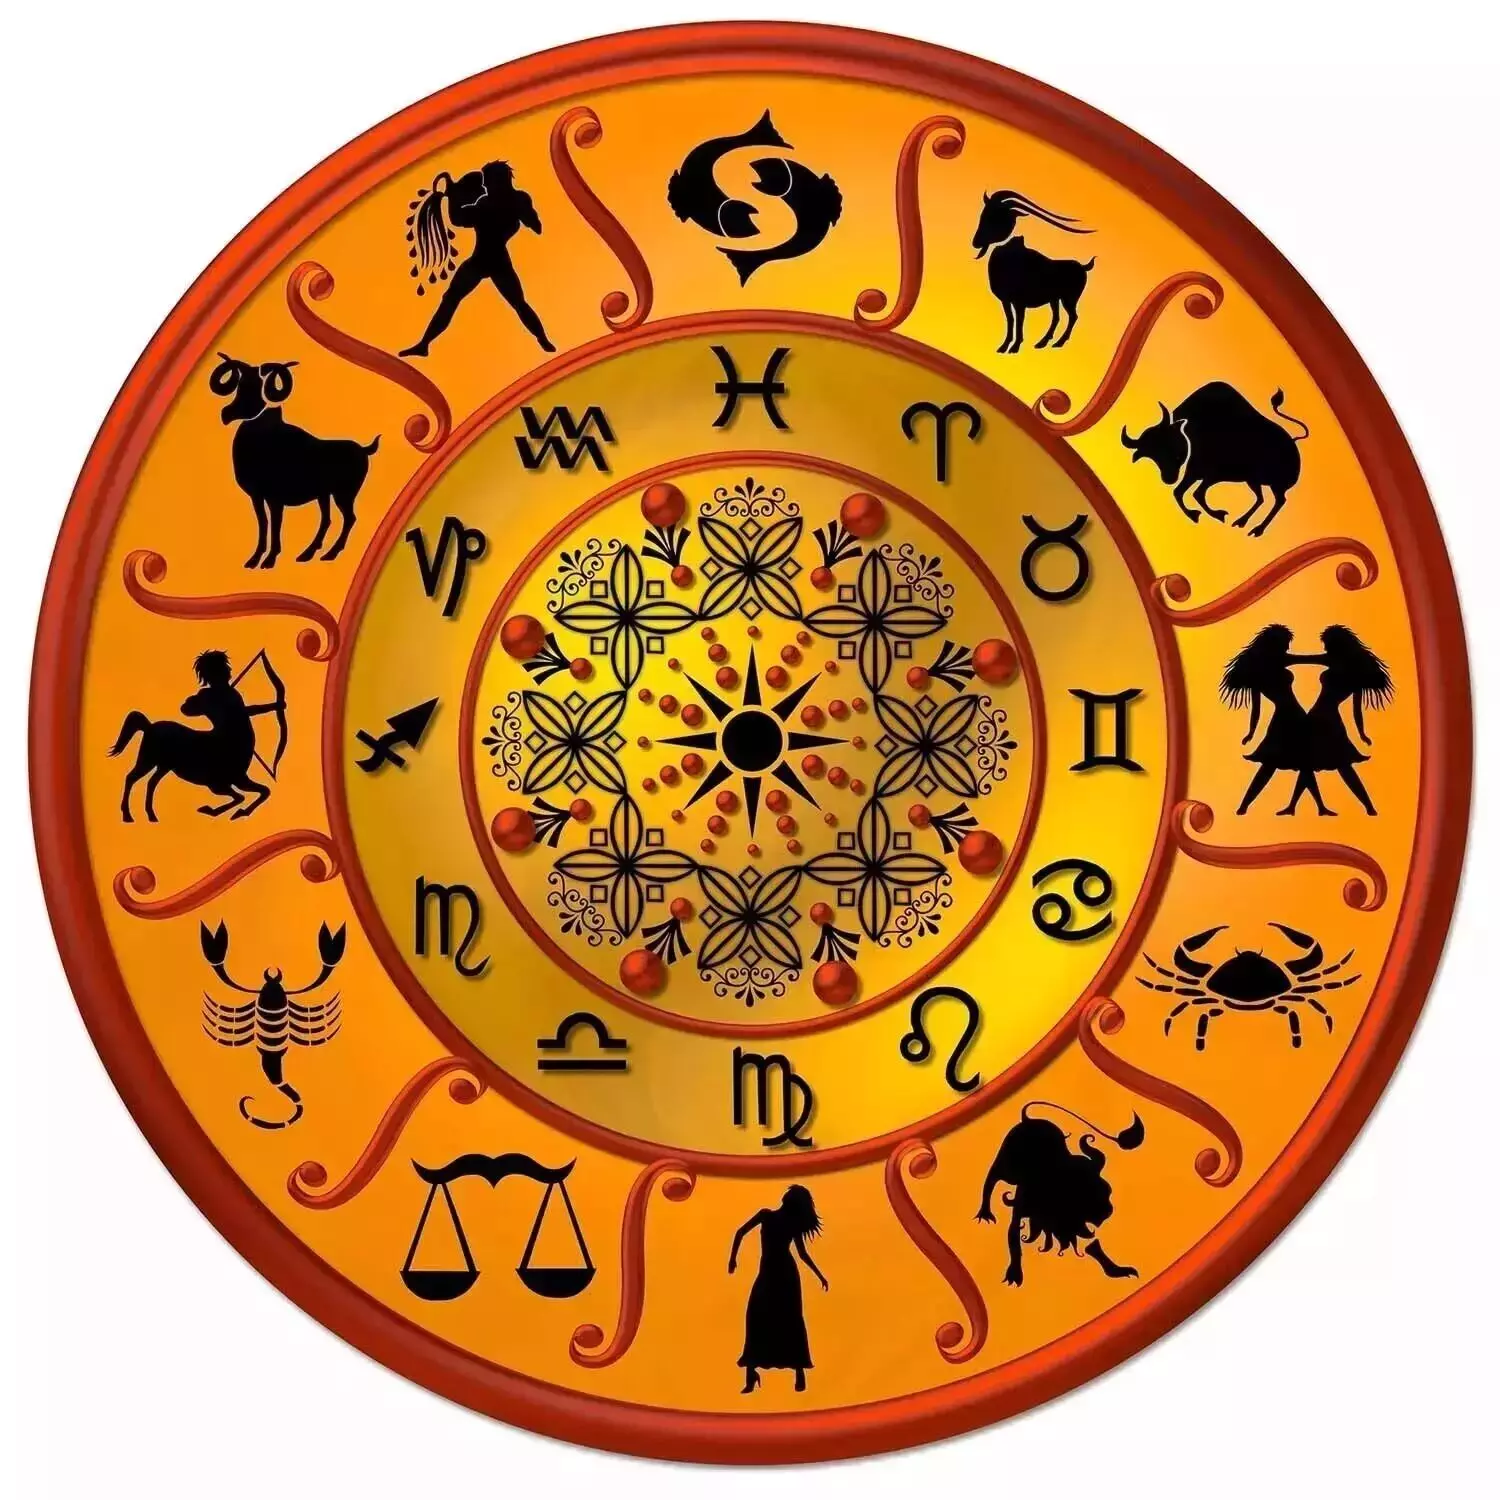 09 February – Know your todays horoscope